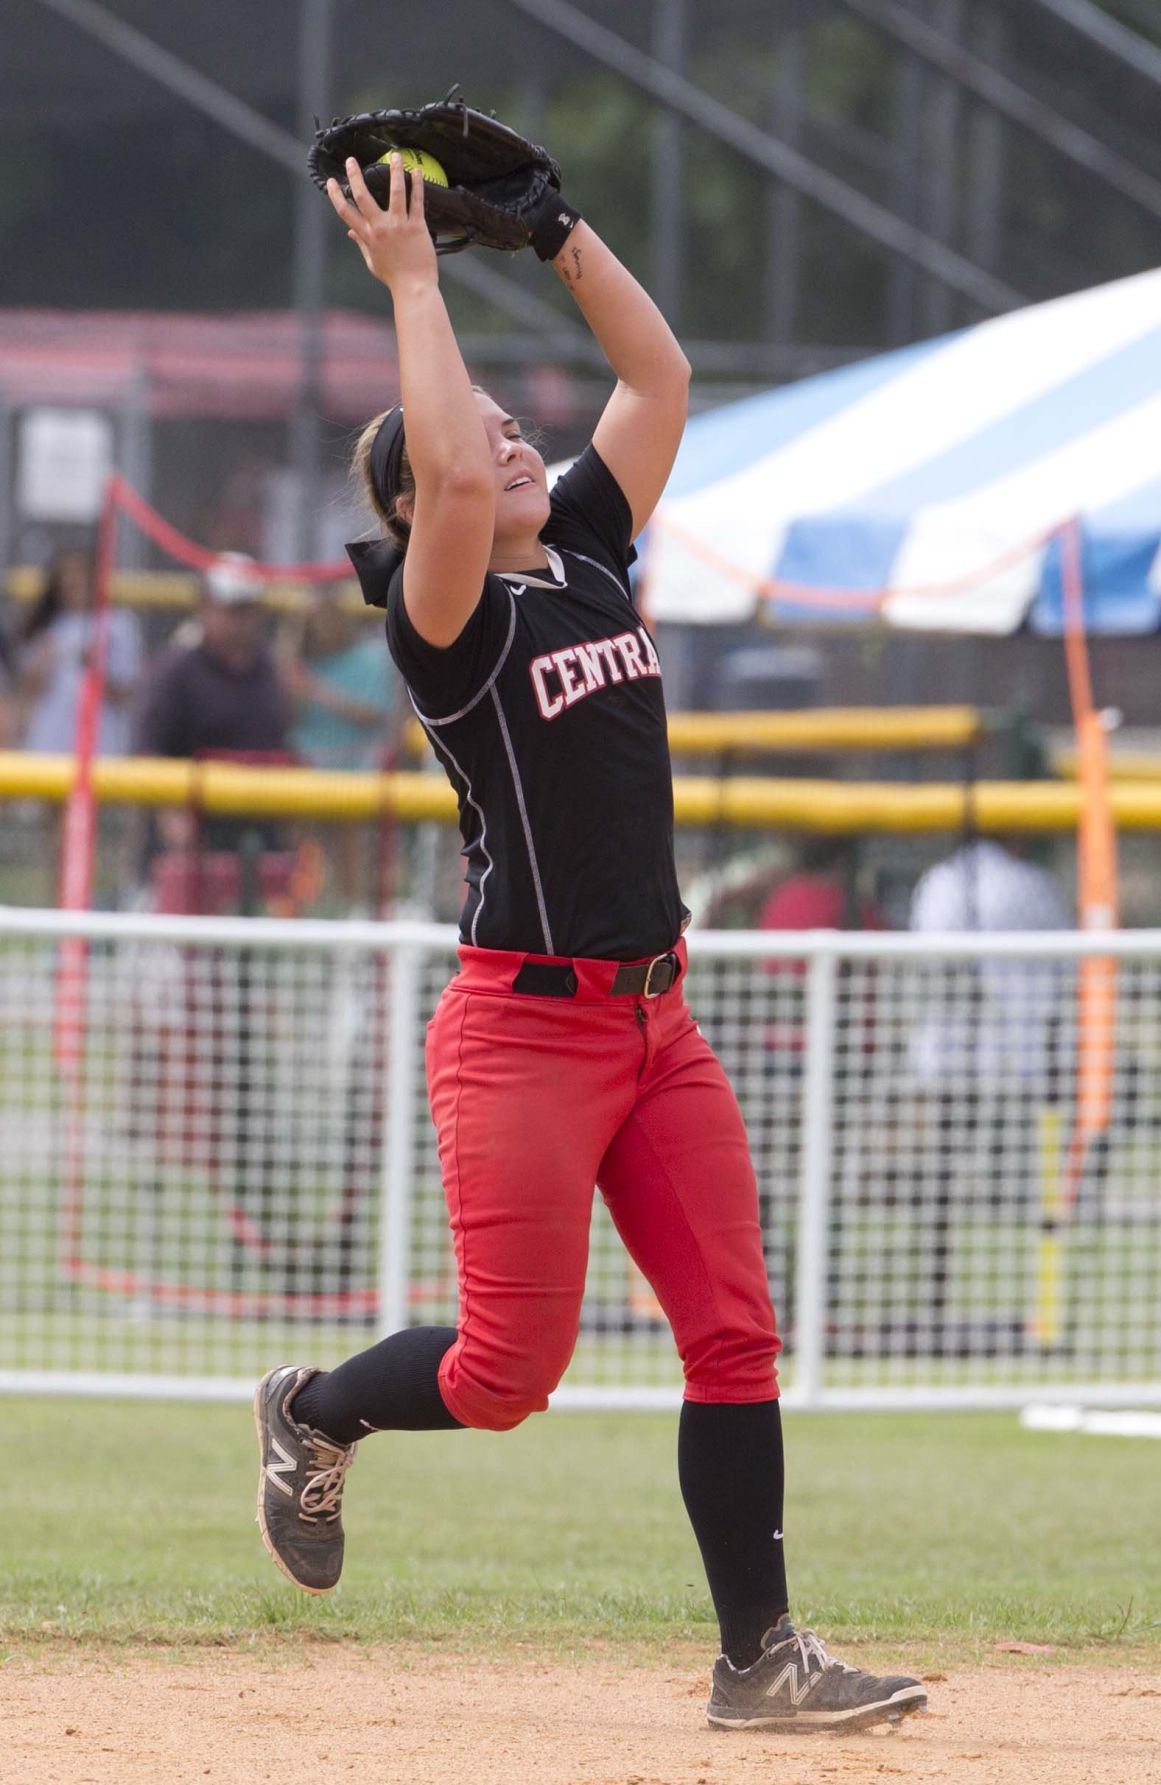 Central loses to Curry 1-0 in 4A state softball championships | Gallery